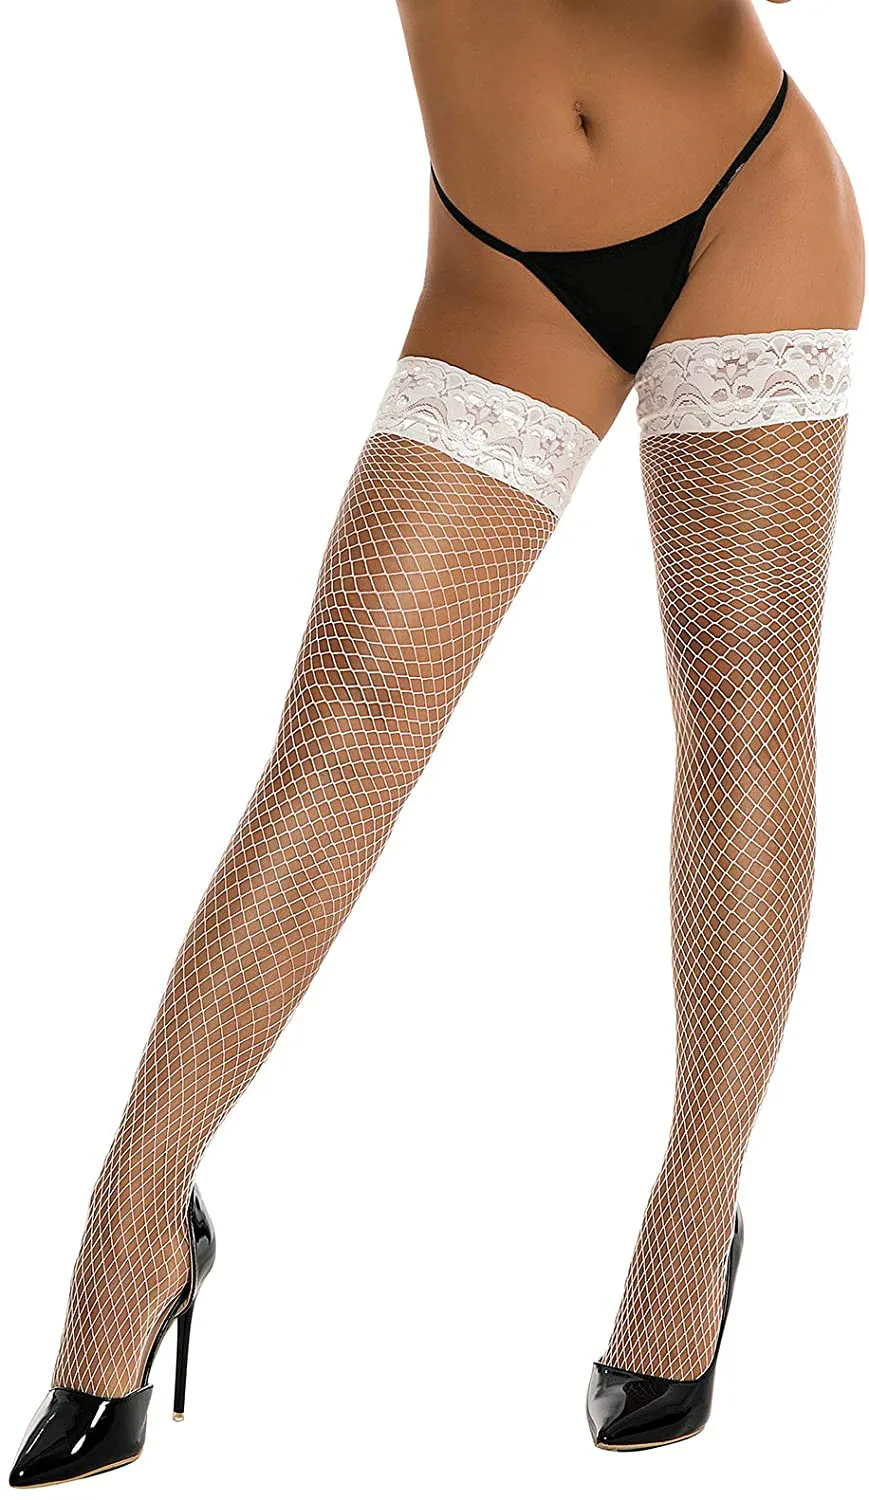 

Shengrenmei 1Pair Lace Stockings for Women Sexy Lingerie Fashion Mesh Stocking Female Sexy Stay Up Sheer Thigh High Stockings